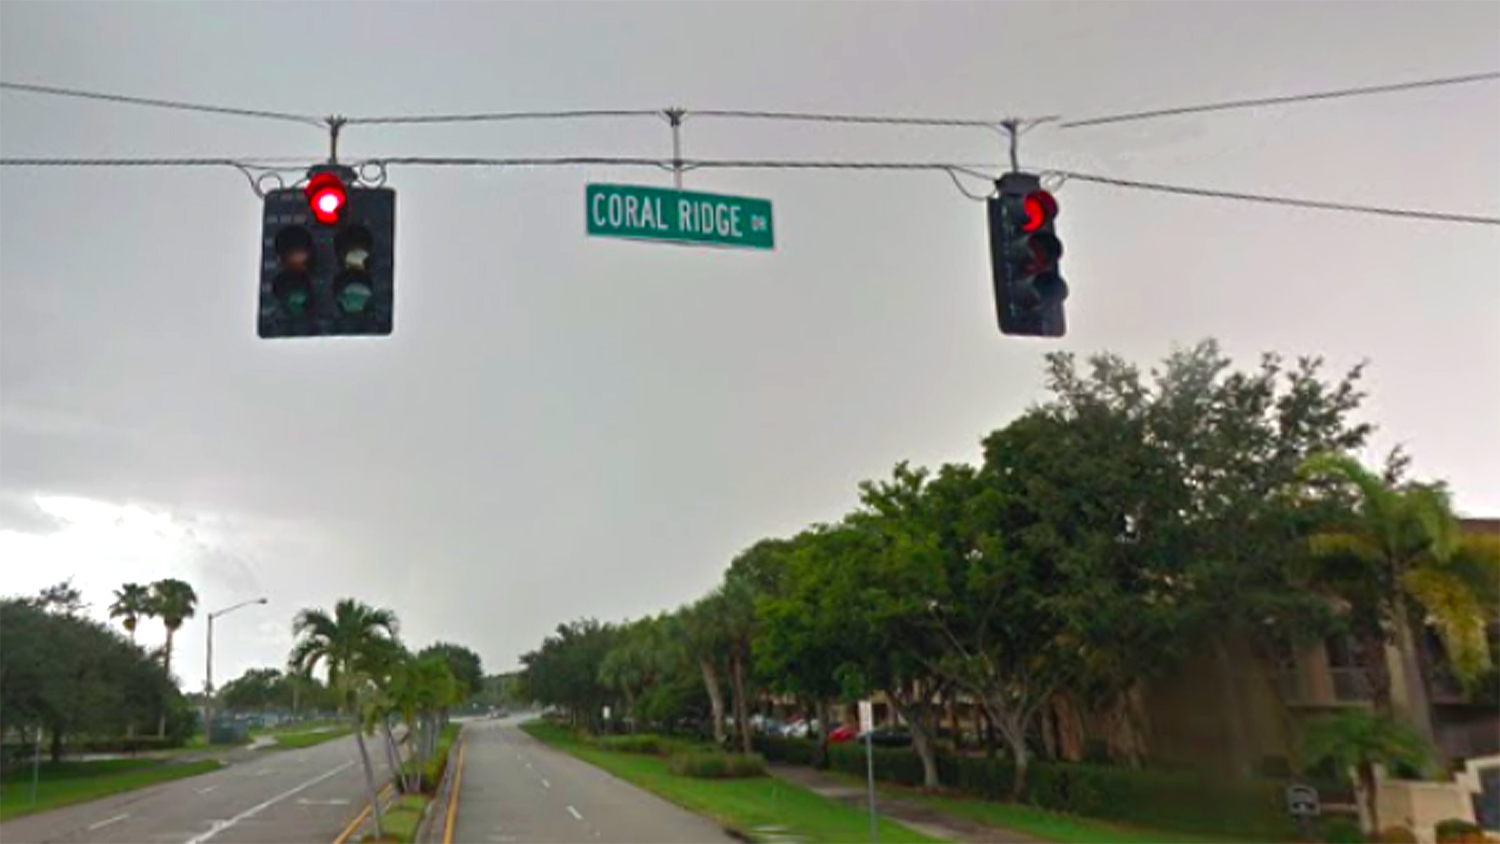 Maintenance Repairs on Sidewalks and Curb Ramps Scheduled for Coral Ridge Drive